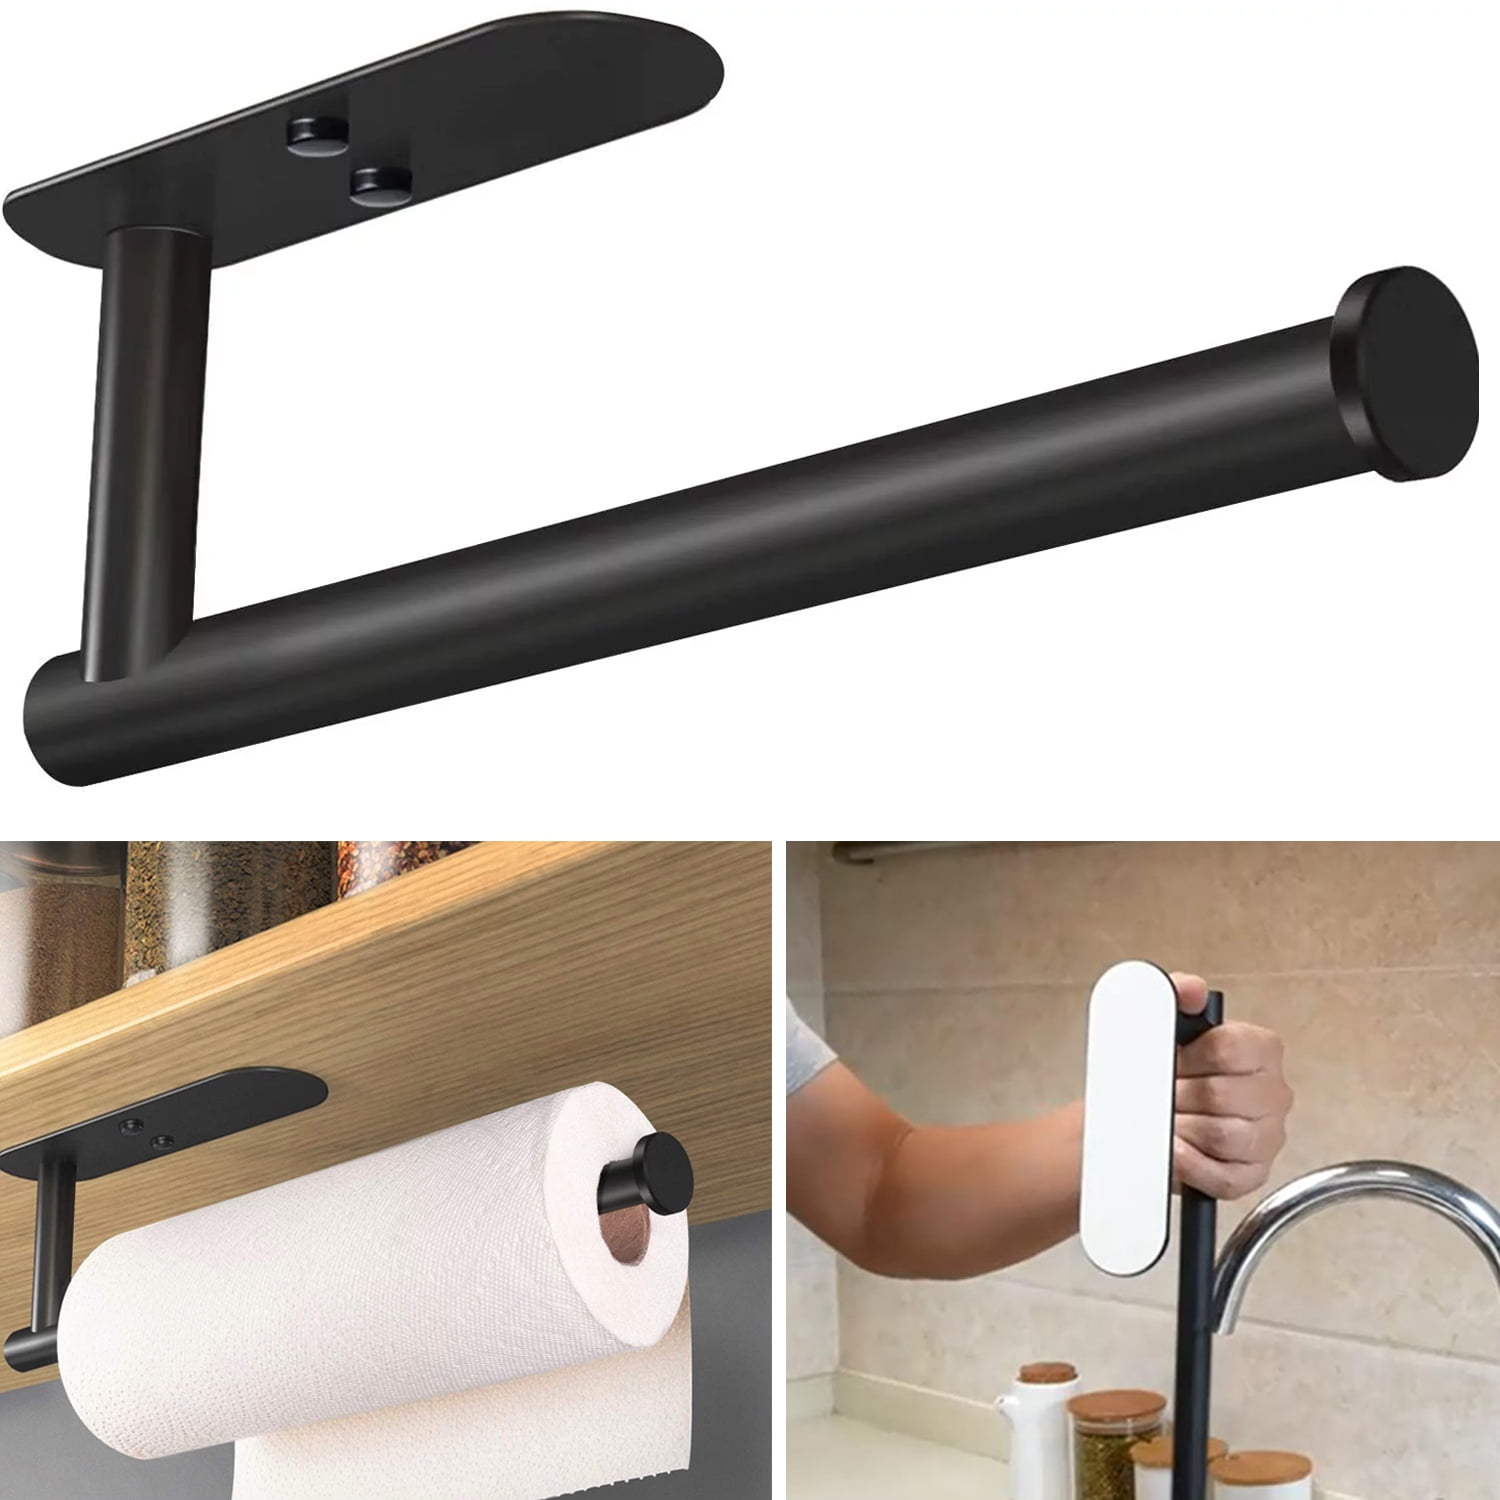 ONLYKXY Paper Towel Holder Wall Mount/Under Cabinet,Thicken Paint Spraying Iron,no Drilling,Paper Towel Holder Dispenser Under Cabinet Paper Roll